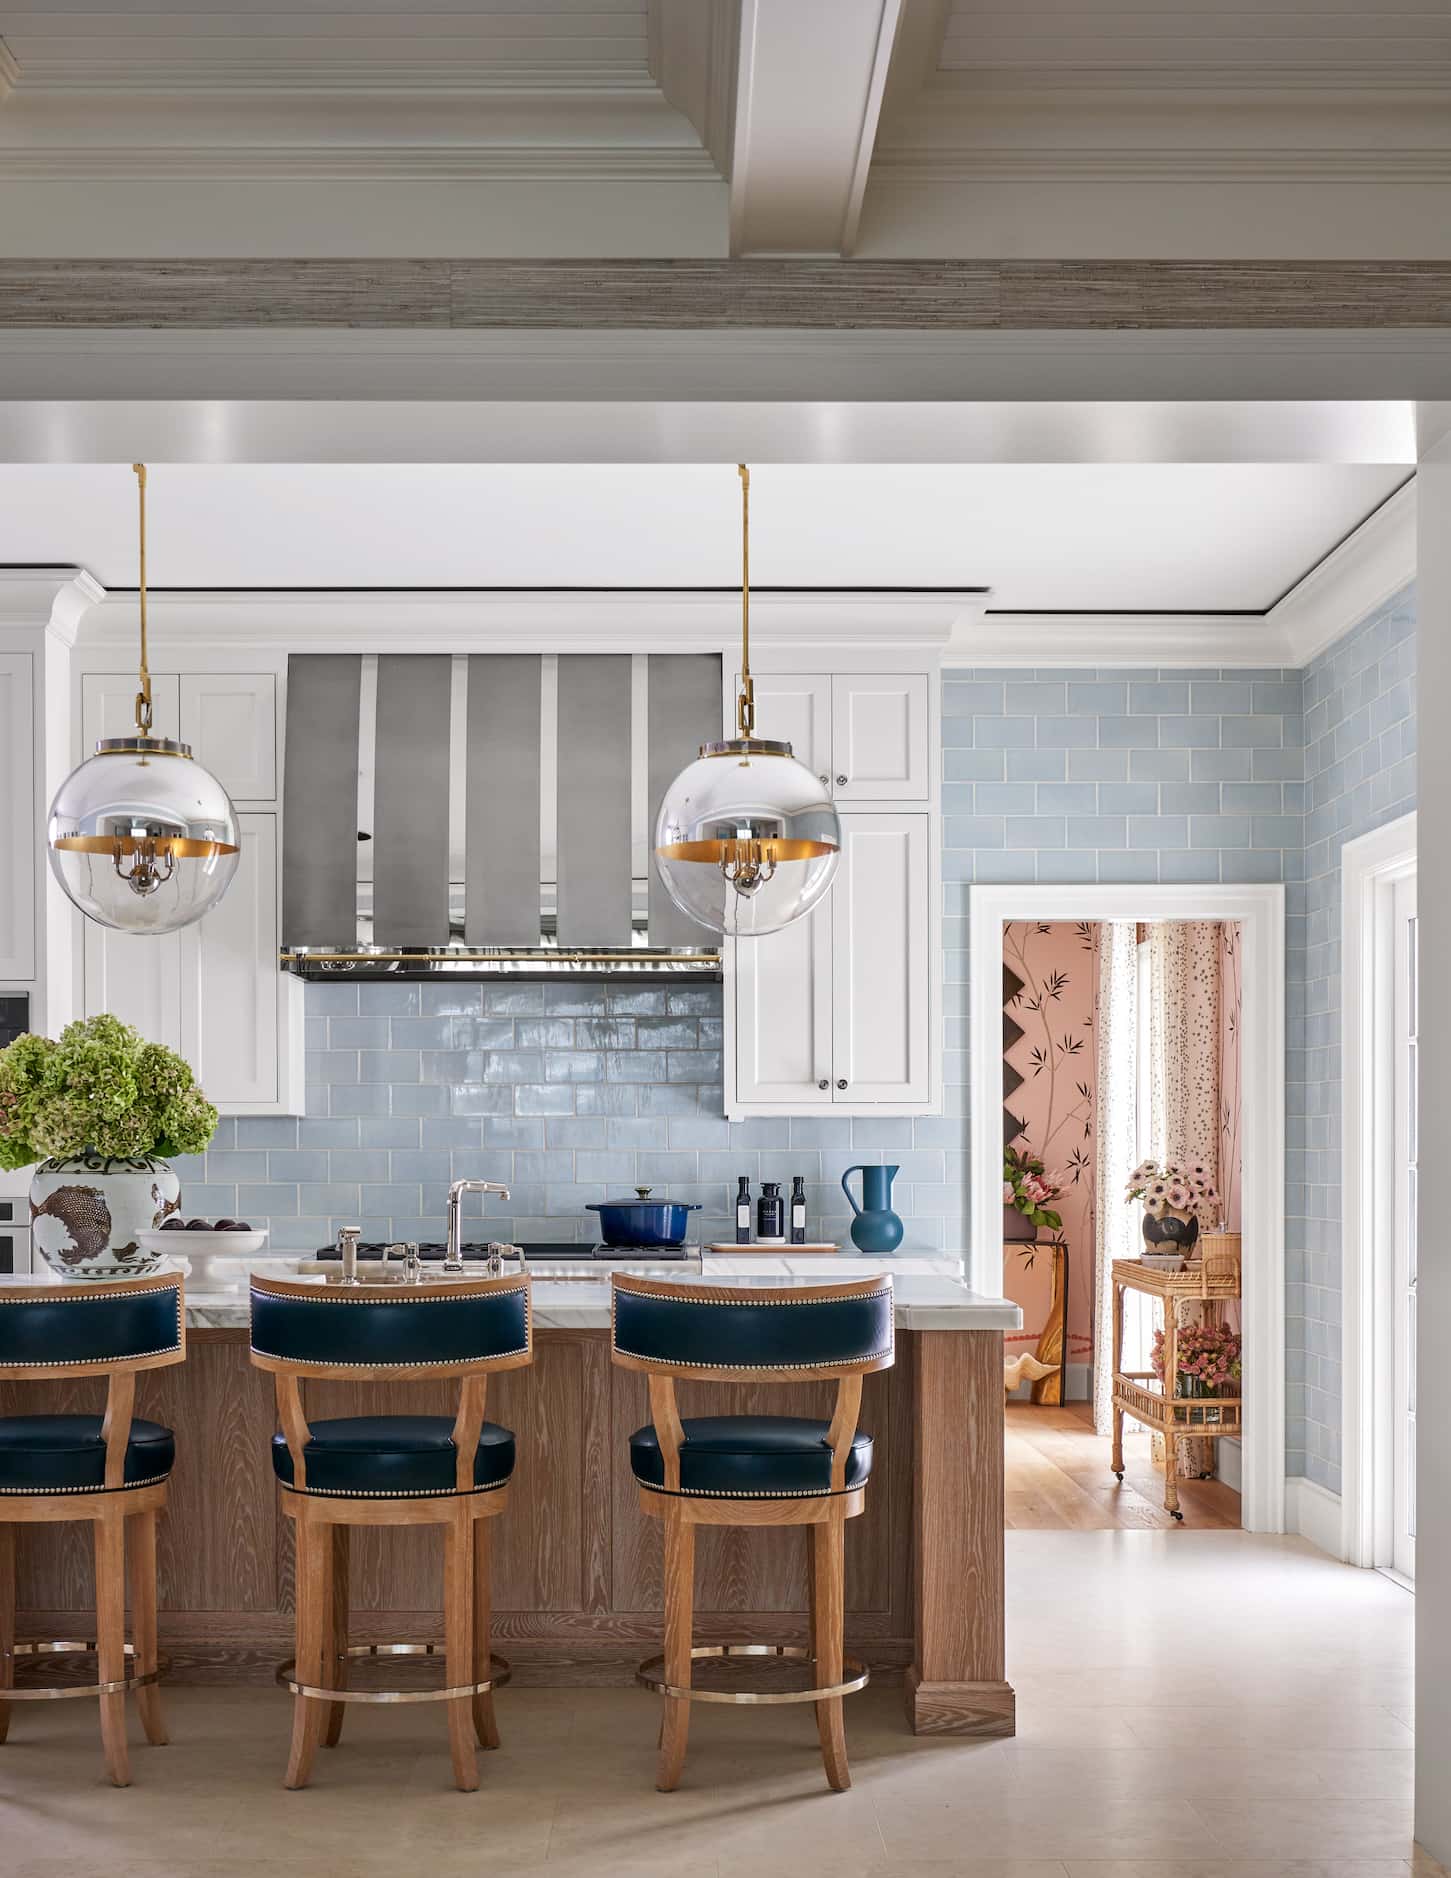 White kitchen with blue tile on walls, large center island and barstools